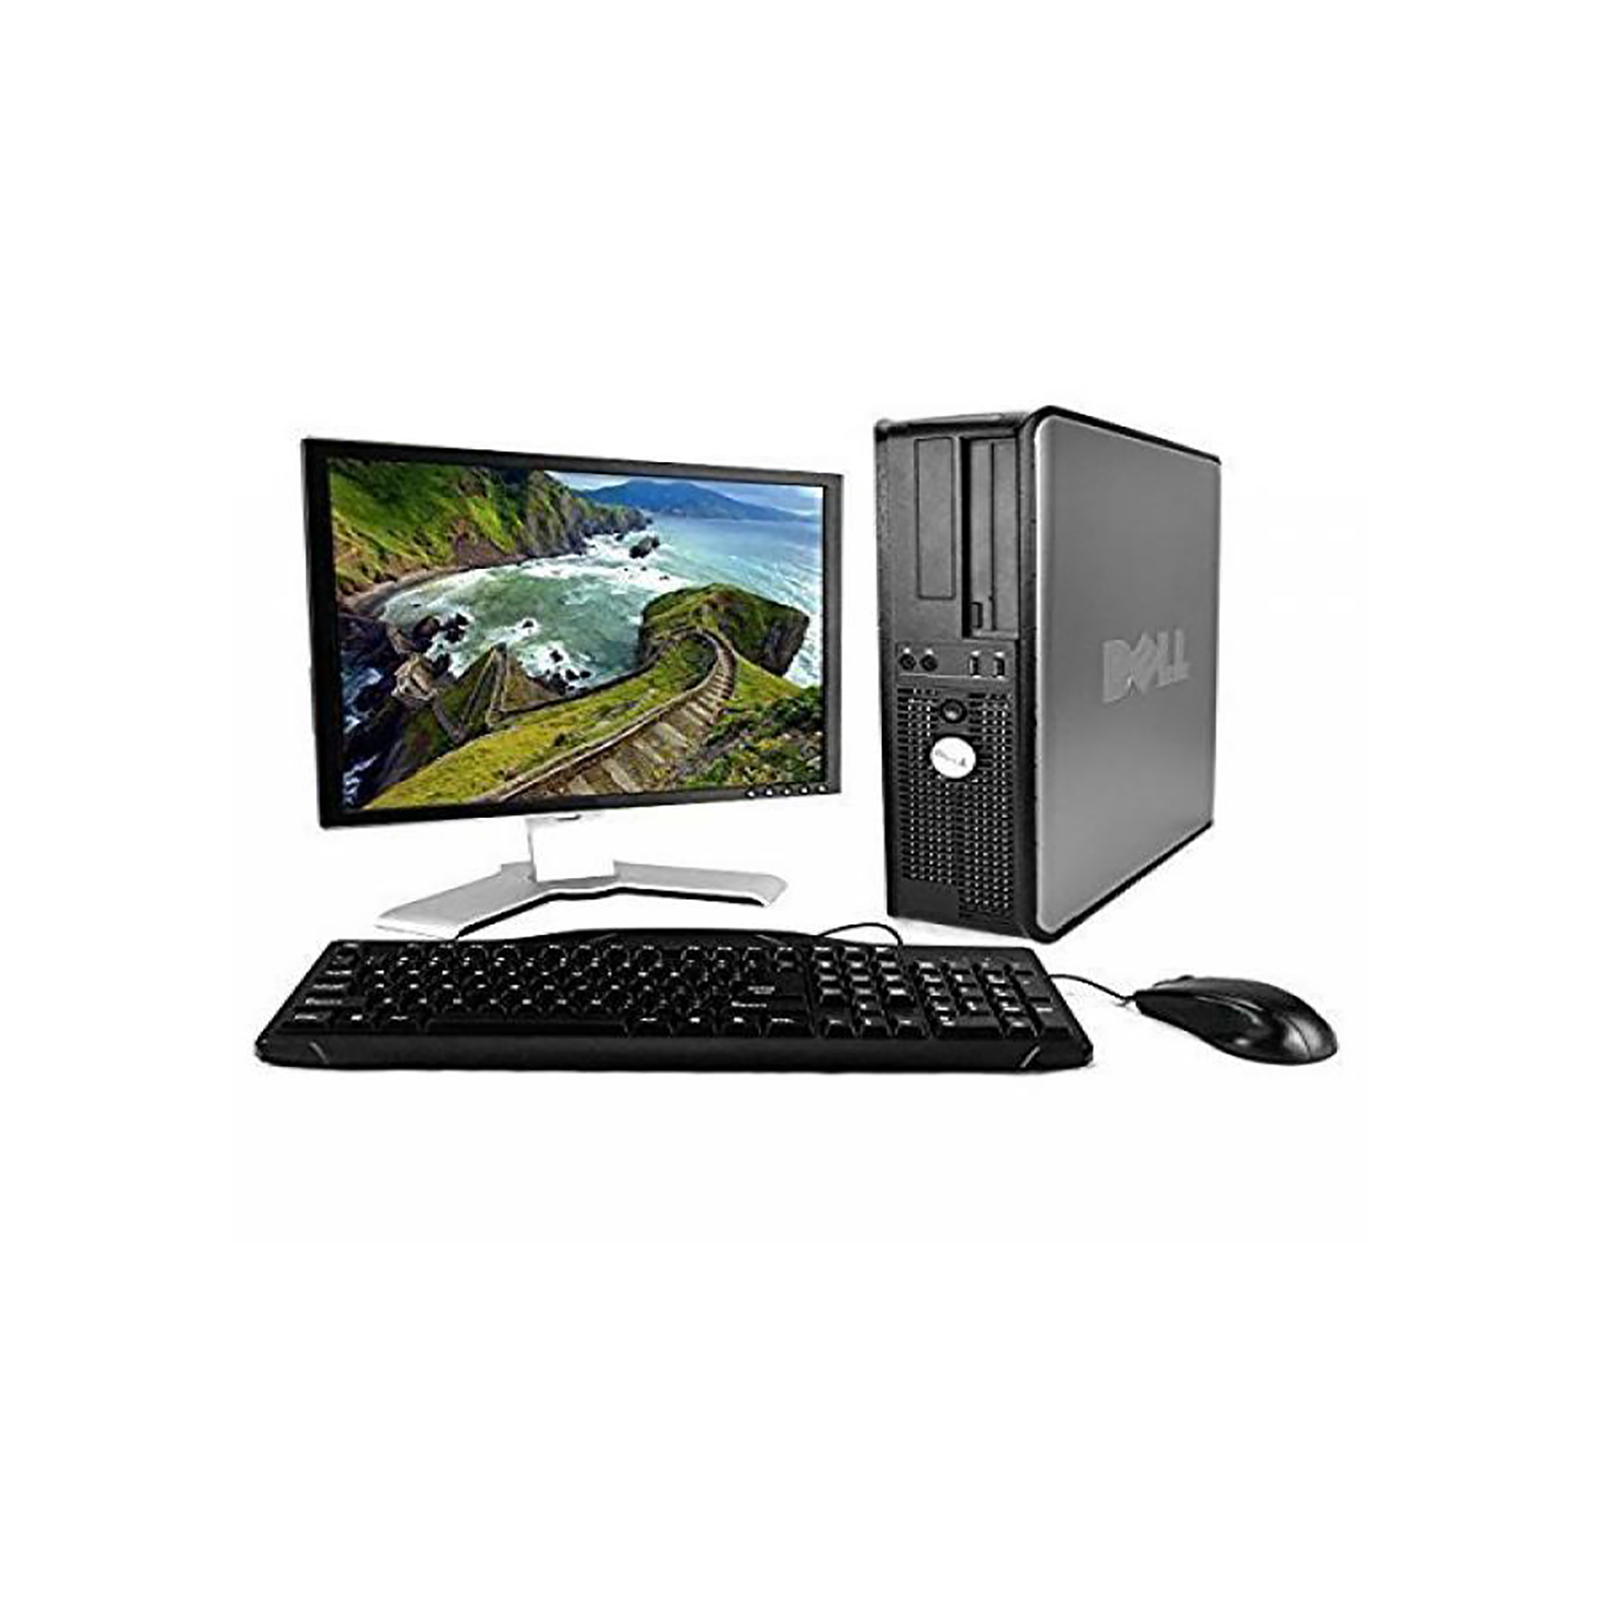 BFWYJG9 Dell Desktop Complete Computer Package with Windows 10 Home C2D  , 4GB, 160GB, DVD,W10H64,WIFI, 22 LCD (Brand May Vary)